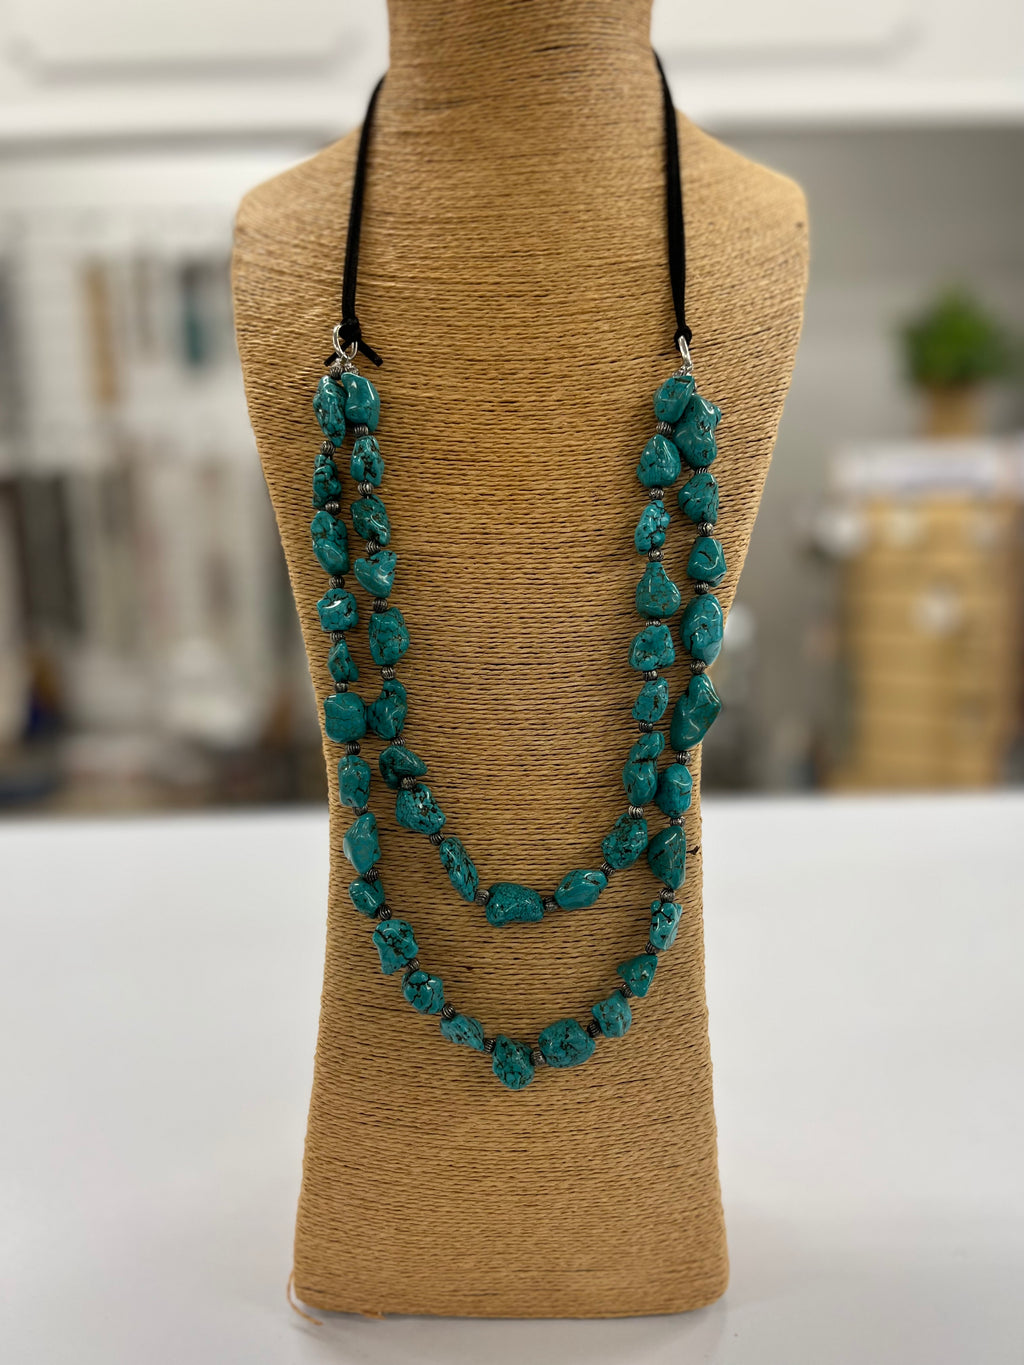 Black Leather Turquoise Necklace